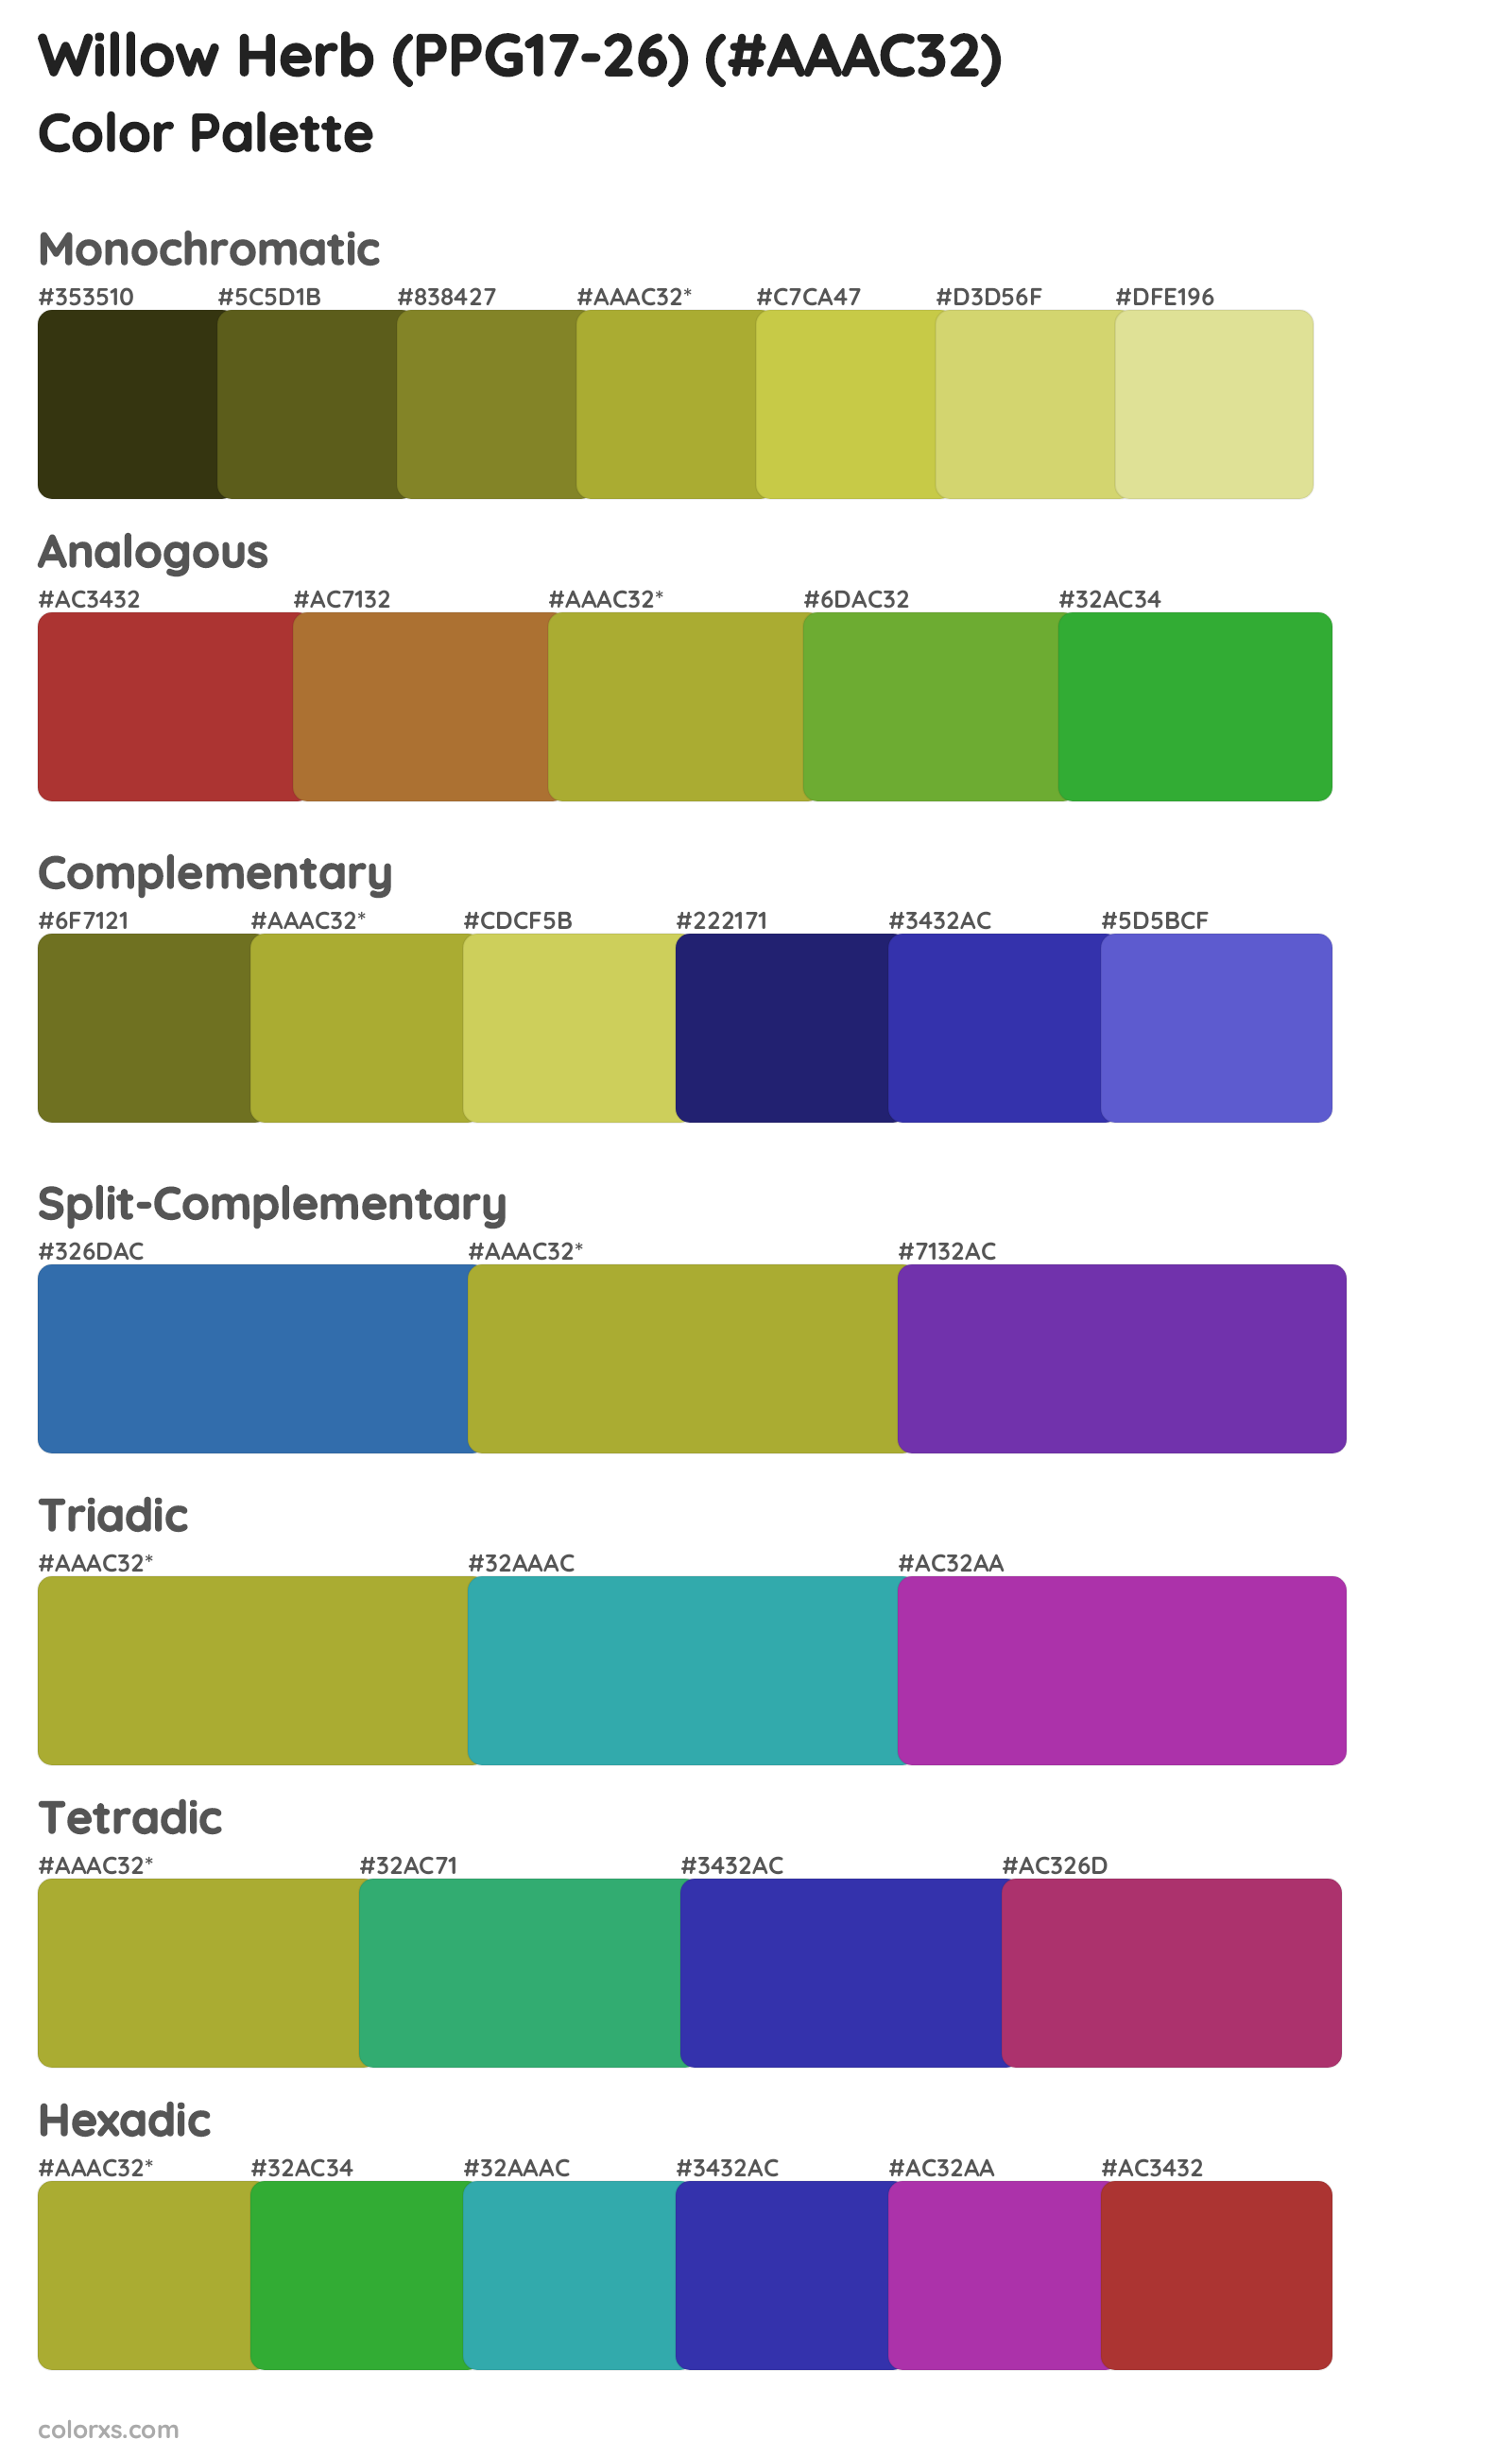 Willow Herb (PPG17-26) Color Scheme Palettes